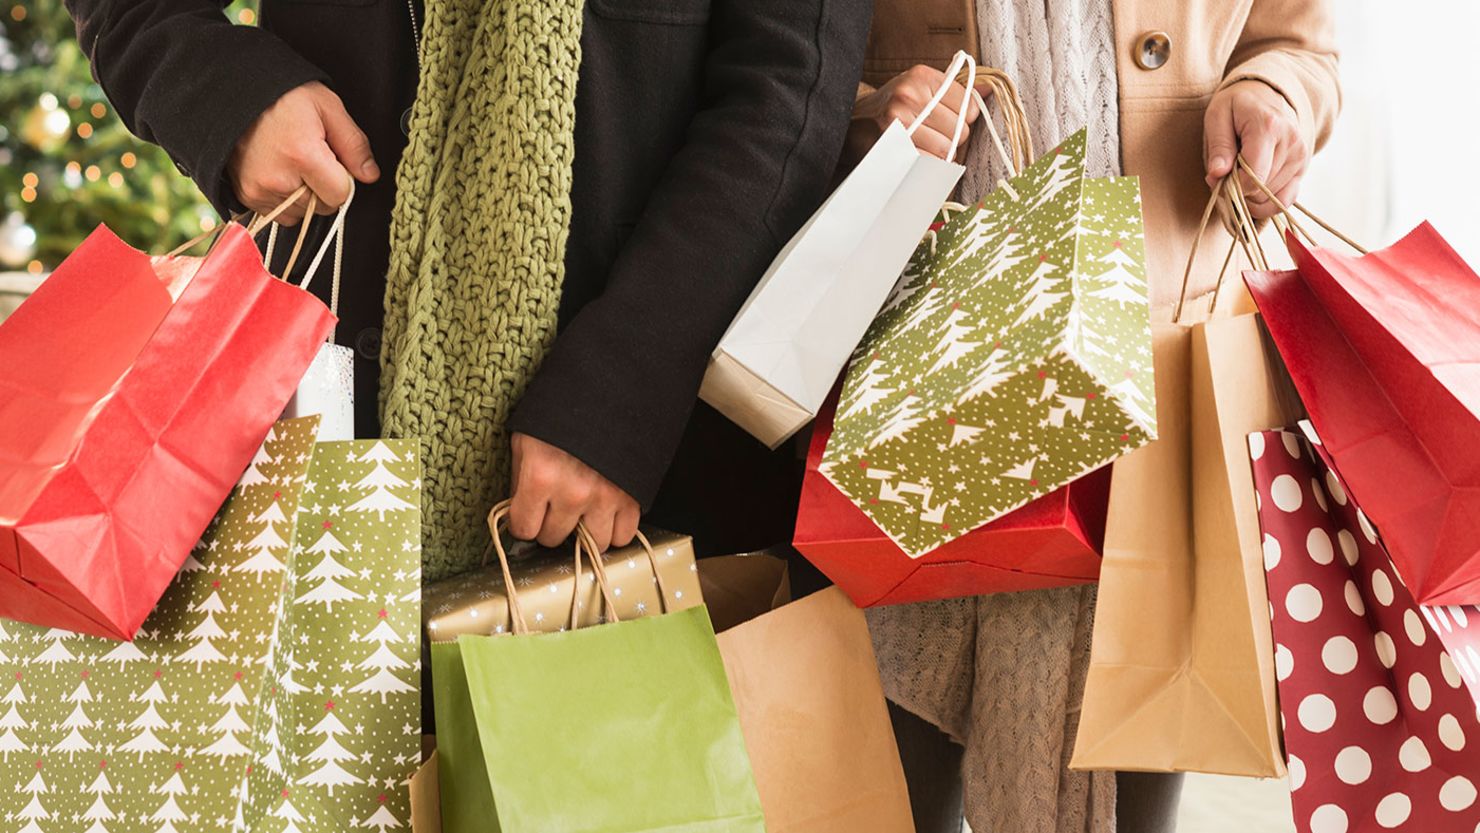 It’s no surprise that shopping feels good, experts say, because it feeds our brains’ rewards systems.